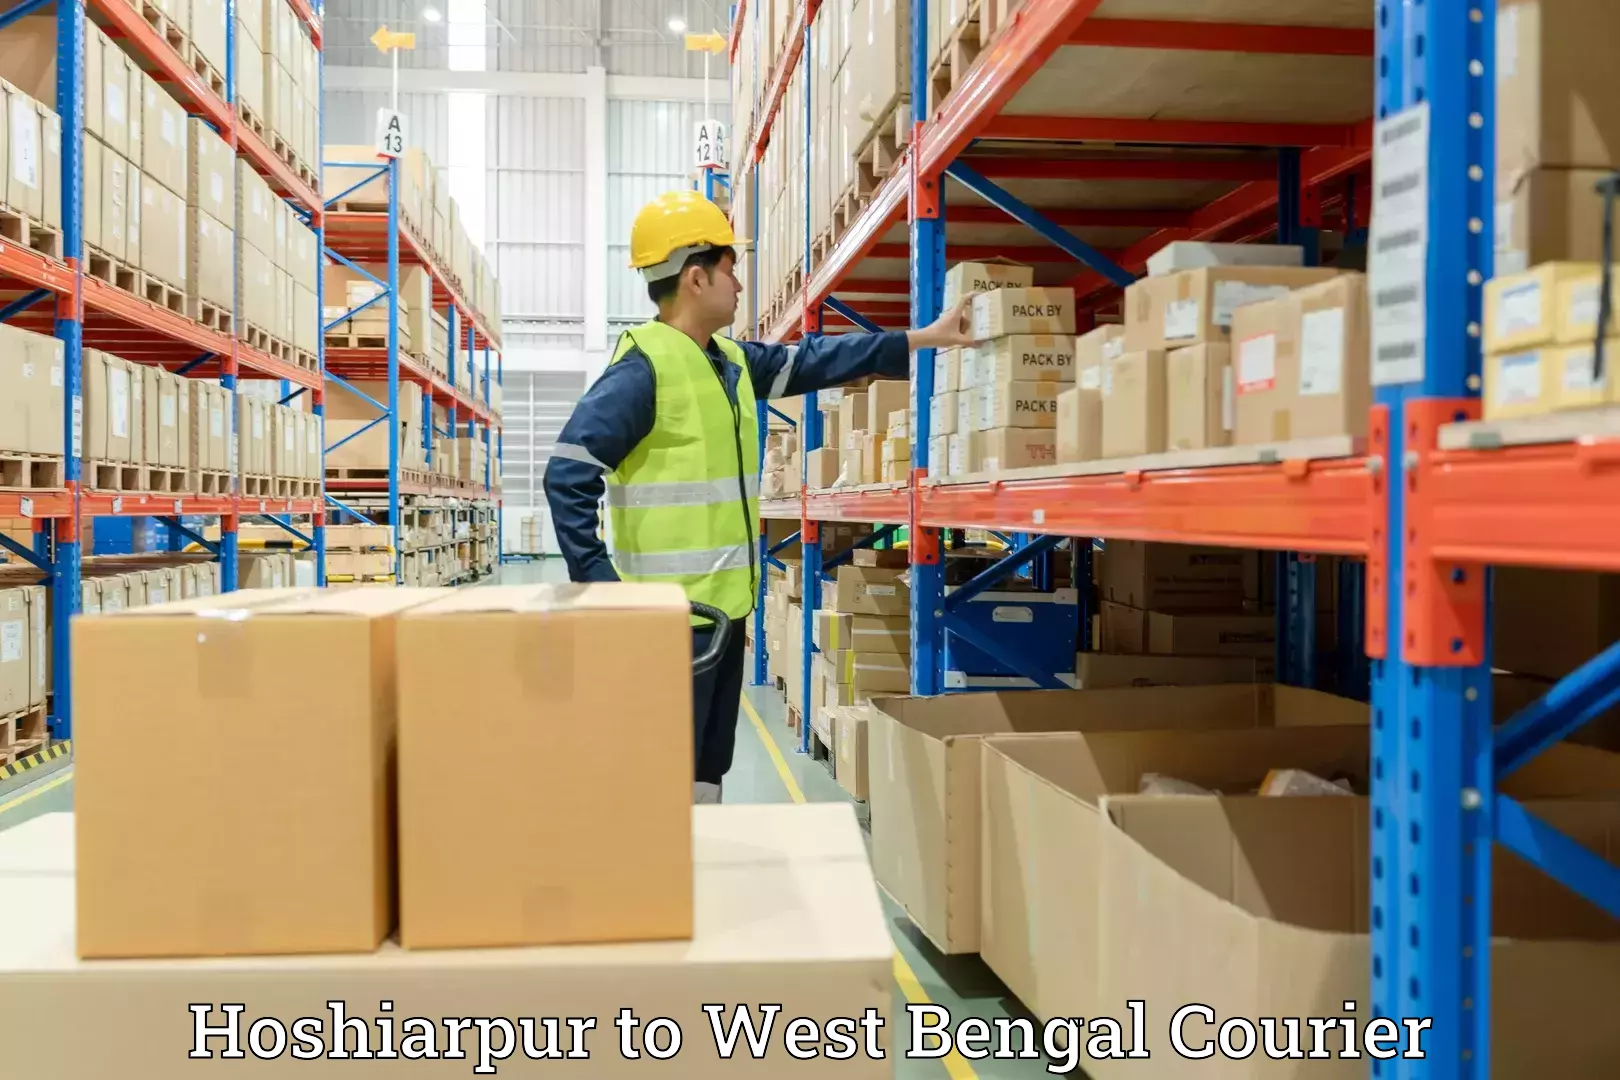 Furniture relocation experts Hoshiarpur to West Bengal